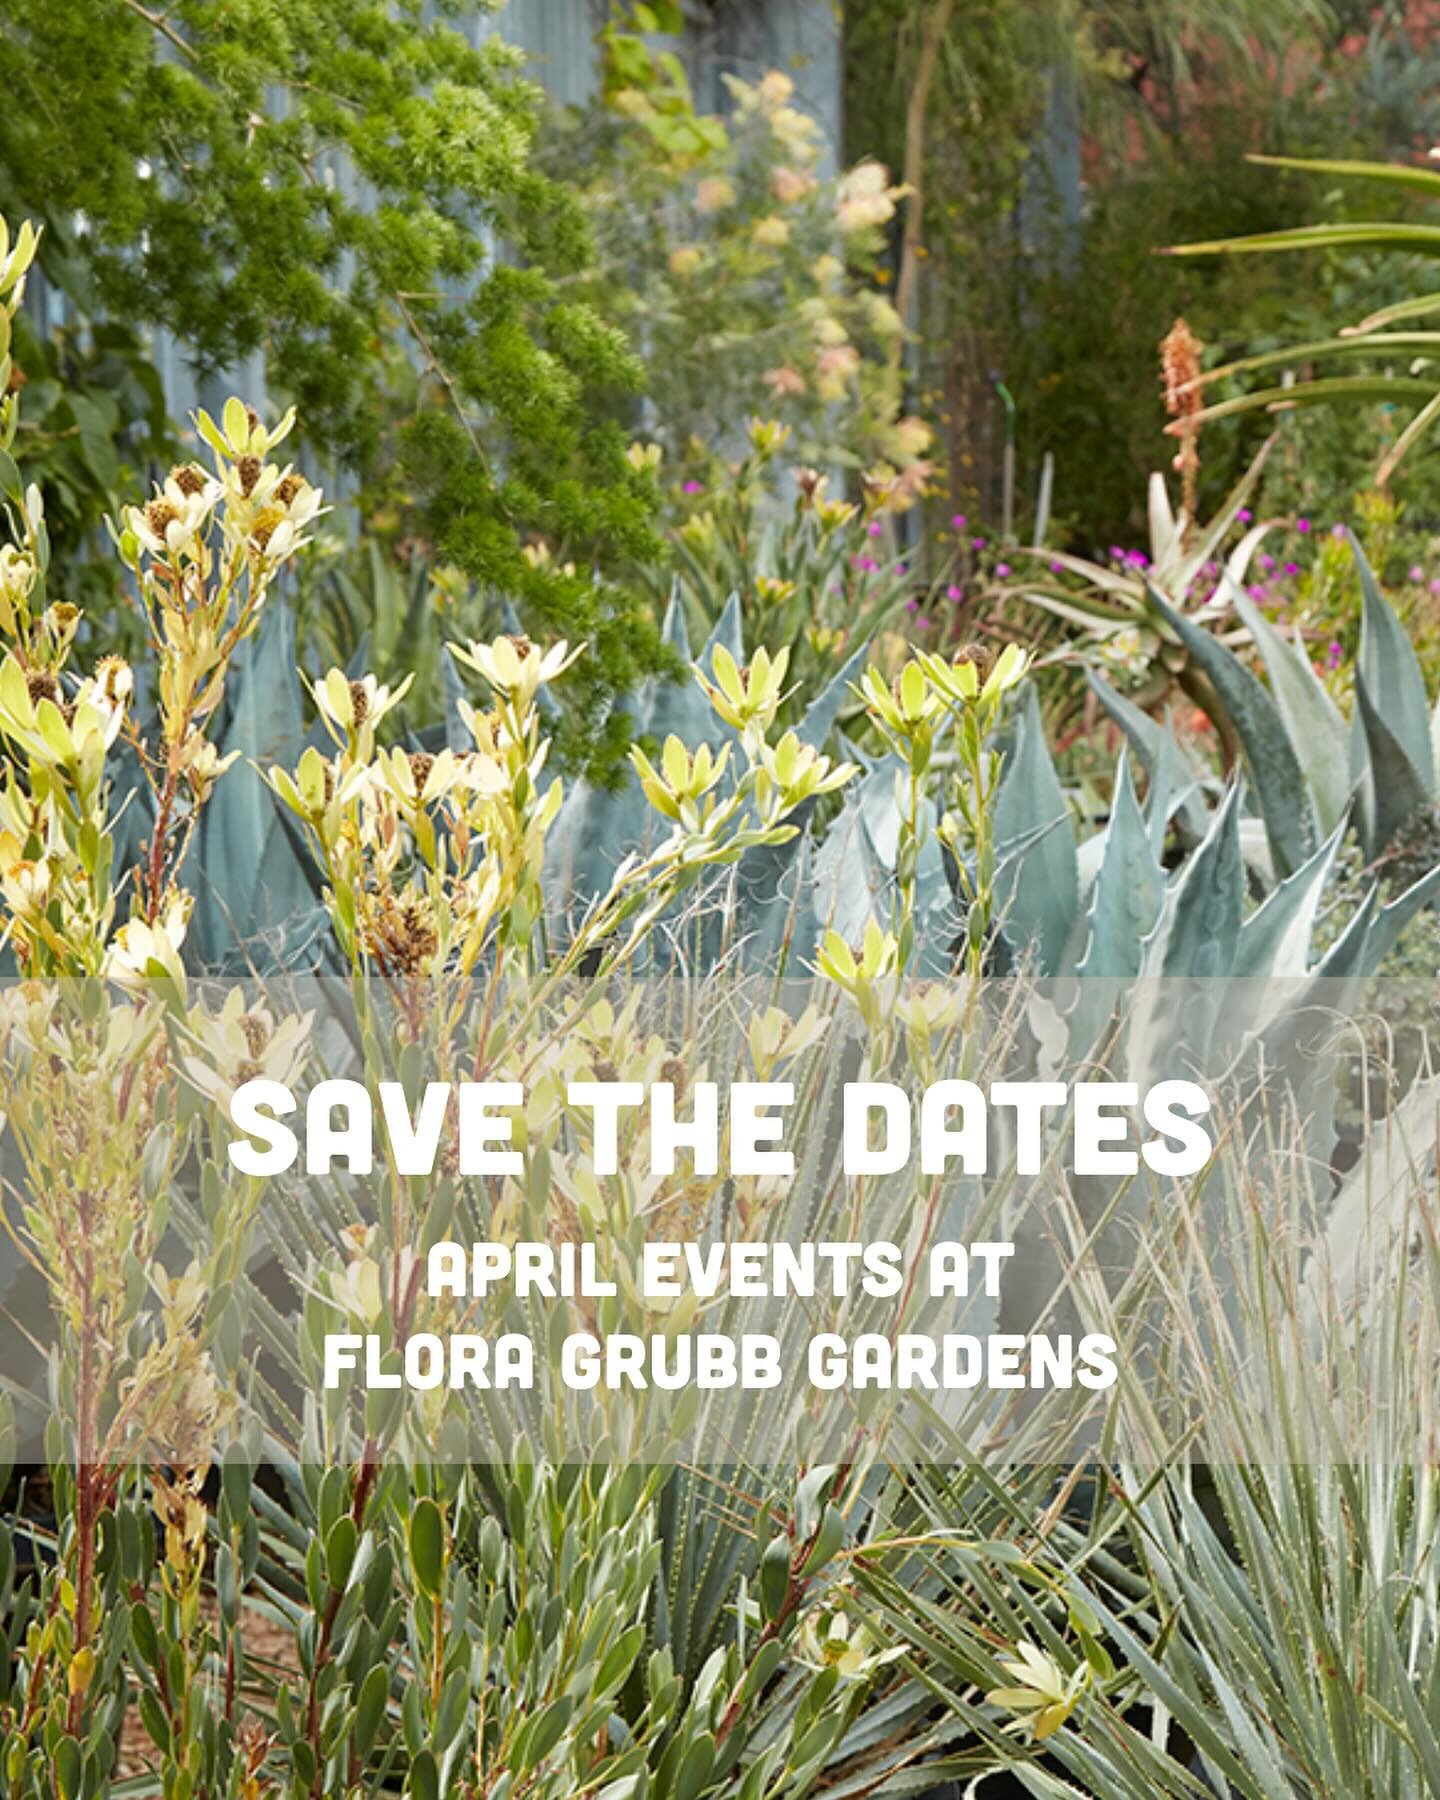 April events at Flora Grubb! 🌿 @hiltoncarter on 4/18 at Flora Grubb LA 💚 Cannabis Gardening workshop on 4/13 at Flora Grubb SF 🌵 Book launch party for Garden Wonderland by @pinehouseediblegardens and @juliechai on 4/21 in SF

Link in bio for detai